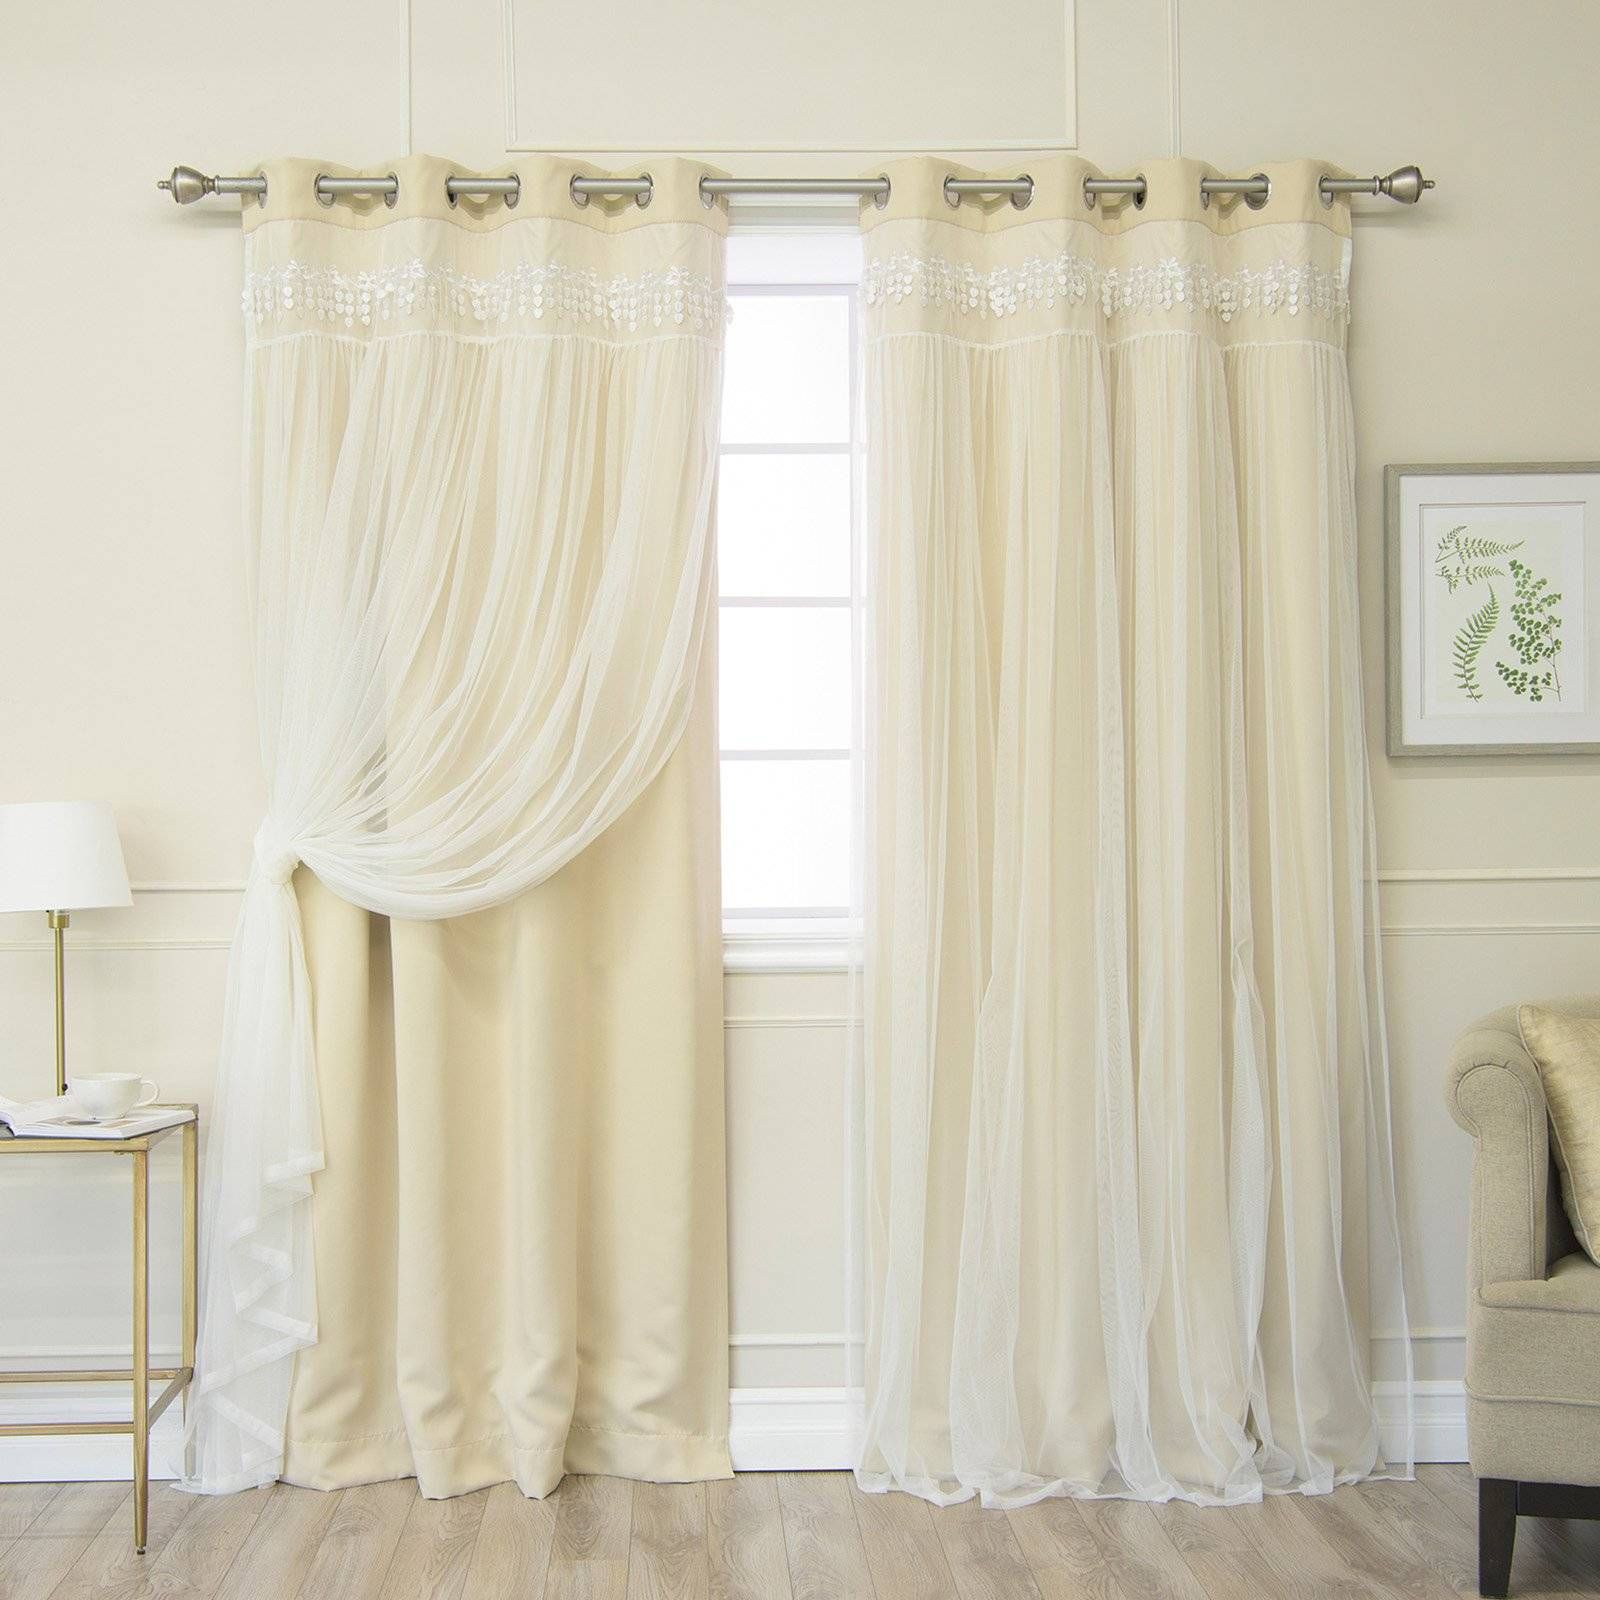 Pretty Country Lace Curtains Swags For Living Room Catalog Throughout Country Style Curtain Parts With White Daisy Lace Accent (Photo 13 of 20)